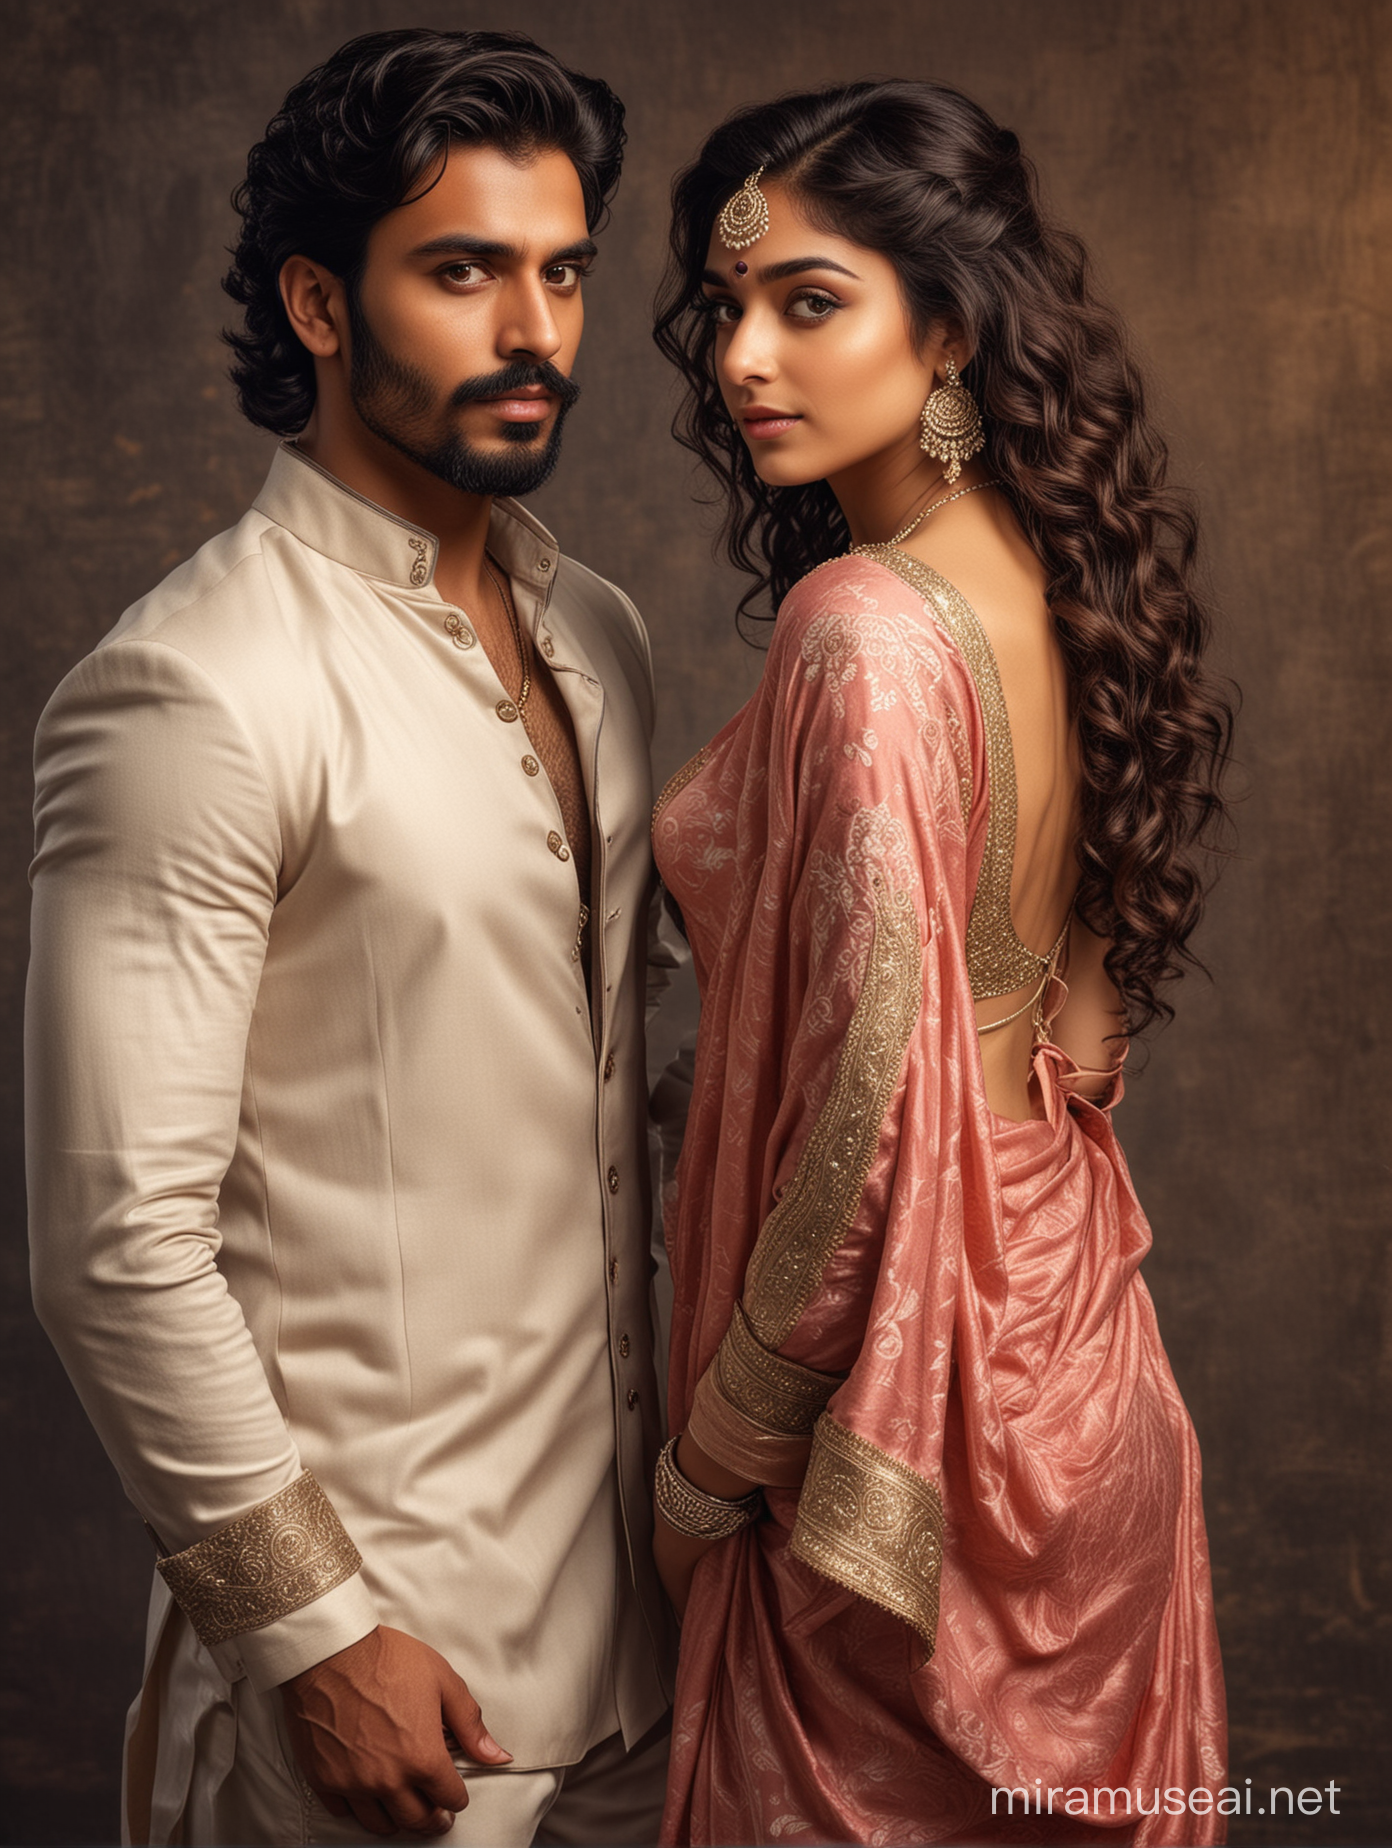 two intimate lovers, full body portrait of most handsome european man as  indian man, elegant and arrogant looks, alfa male, fashionable beard,
girl, turned away, face off, 18 years old, most beautiful indian girl, elegant saree look, low cut back, long curly hair, arrogant looks , photo realistic, 4k.